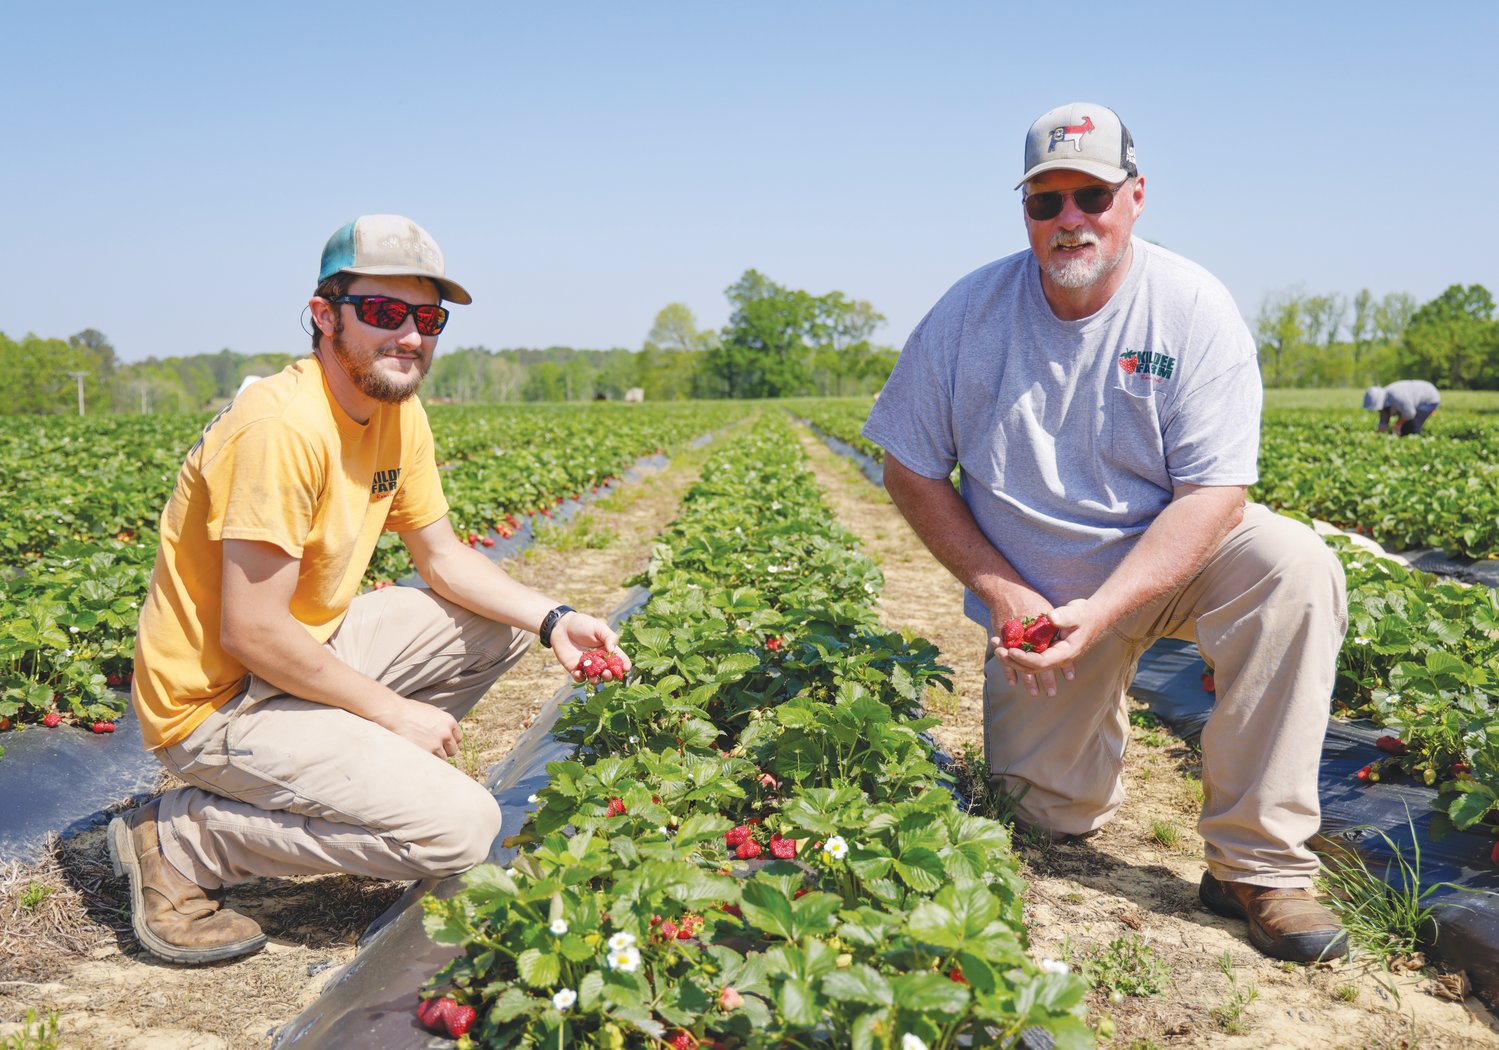 Kildee Farms owner Michael Beal (right) and Nathan Way, who's worked at the farm for more than five years, show off freshly-picked strawberries on Saturday's opening day at Kildee Farms. .